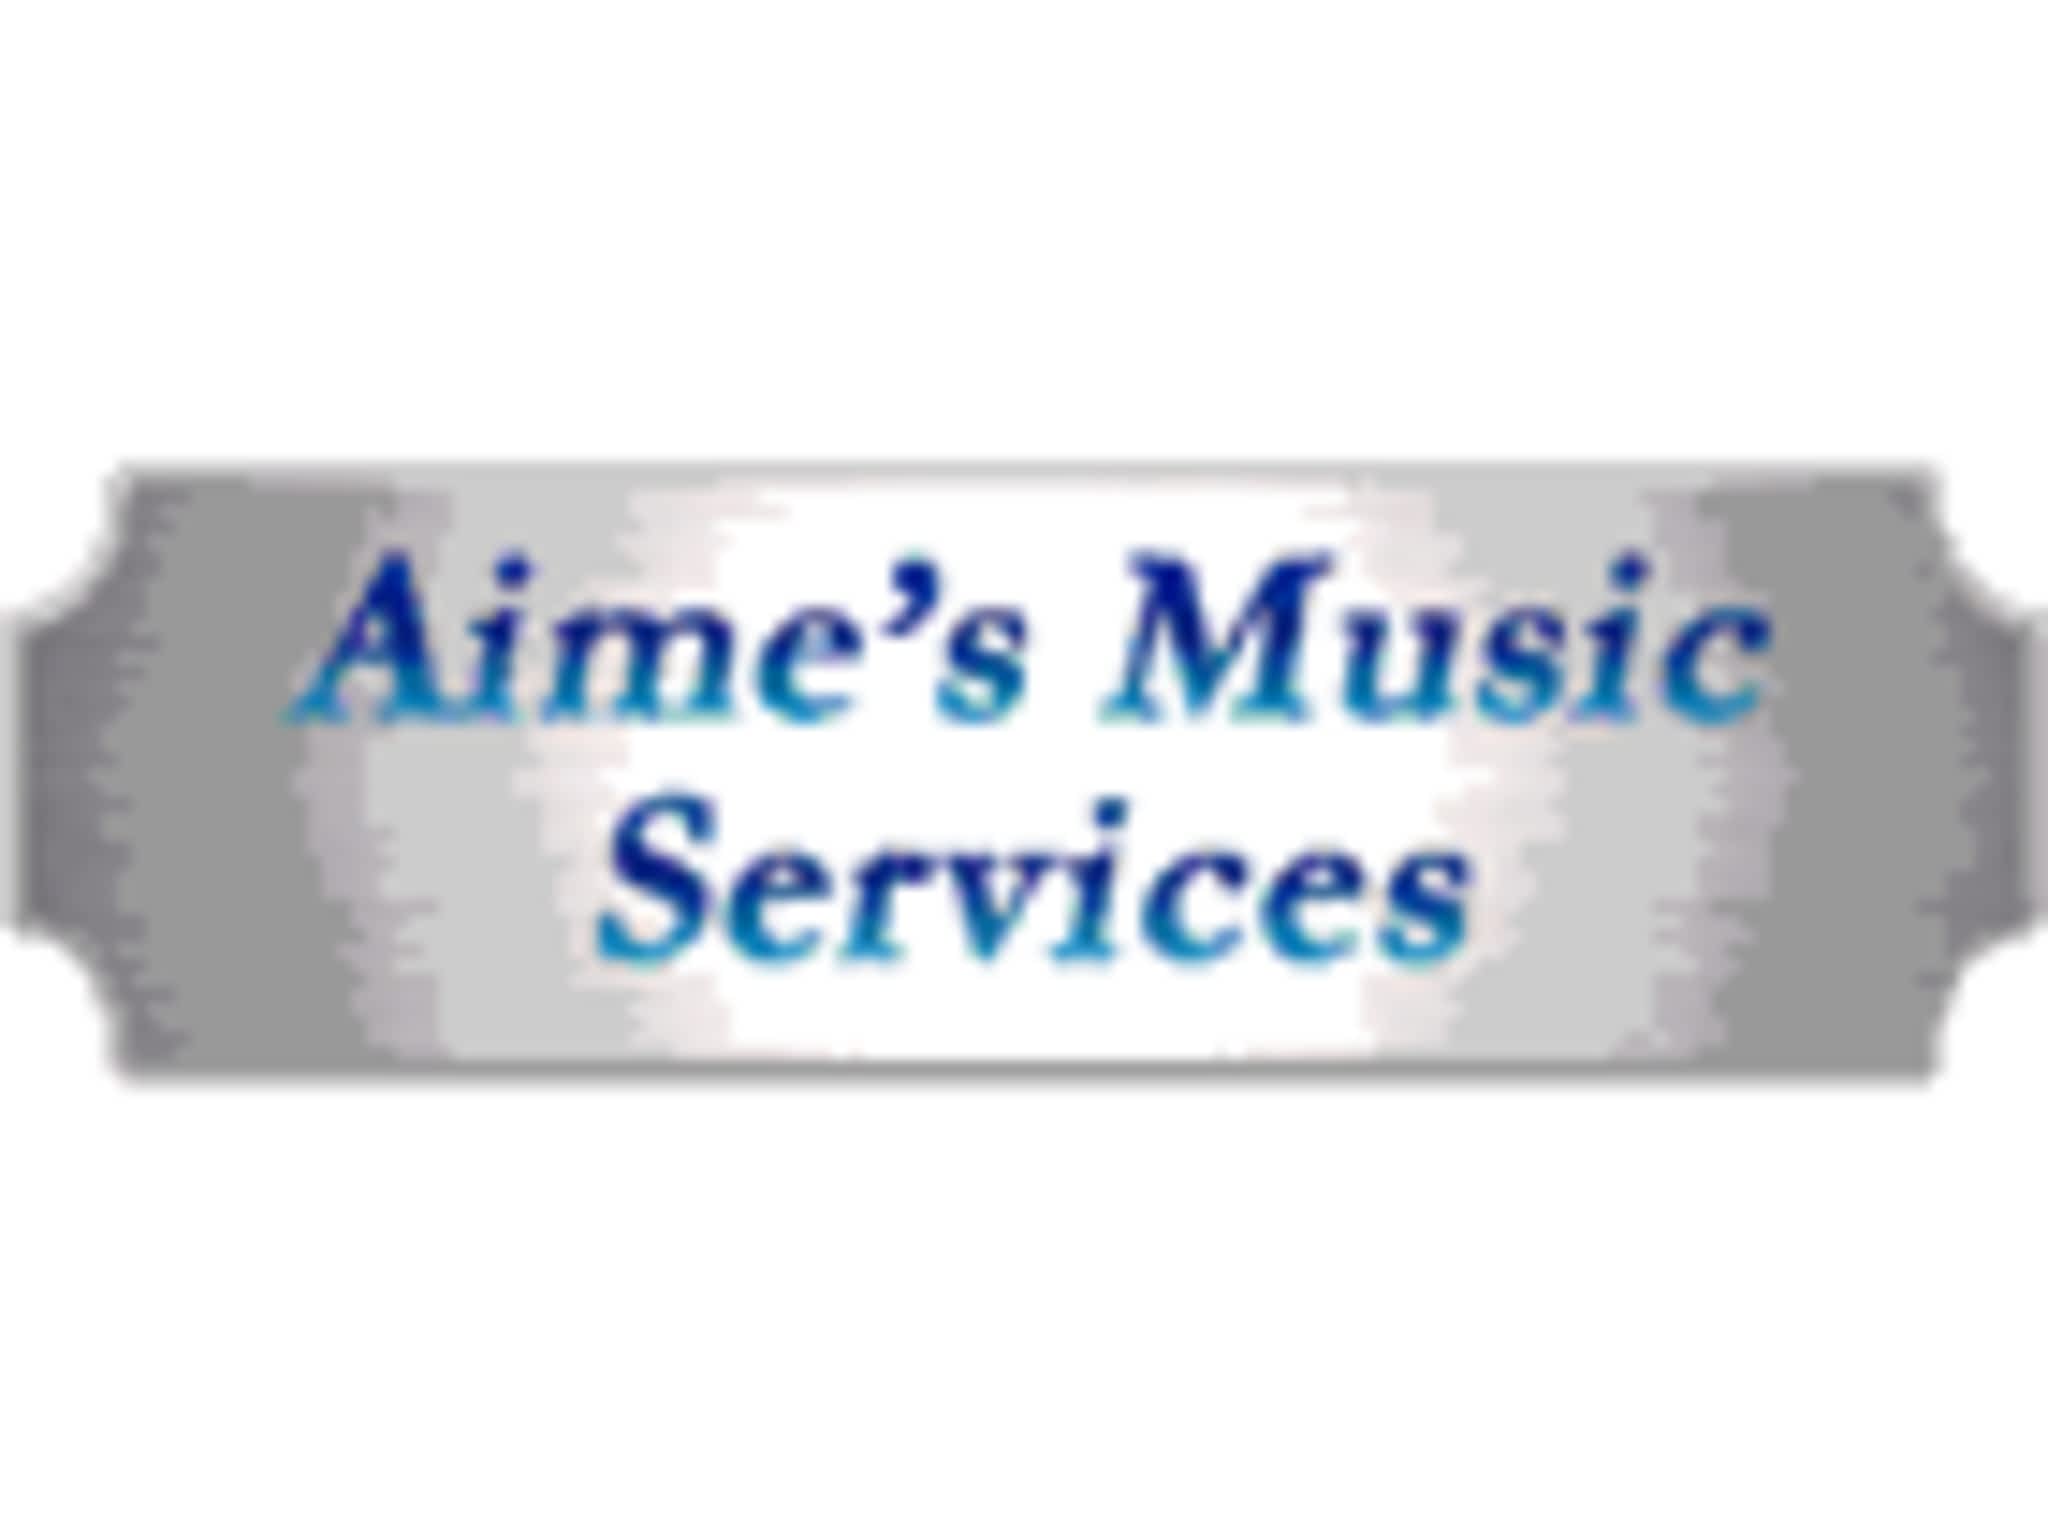 photo Aime's Music Services